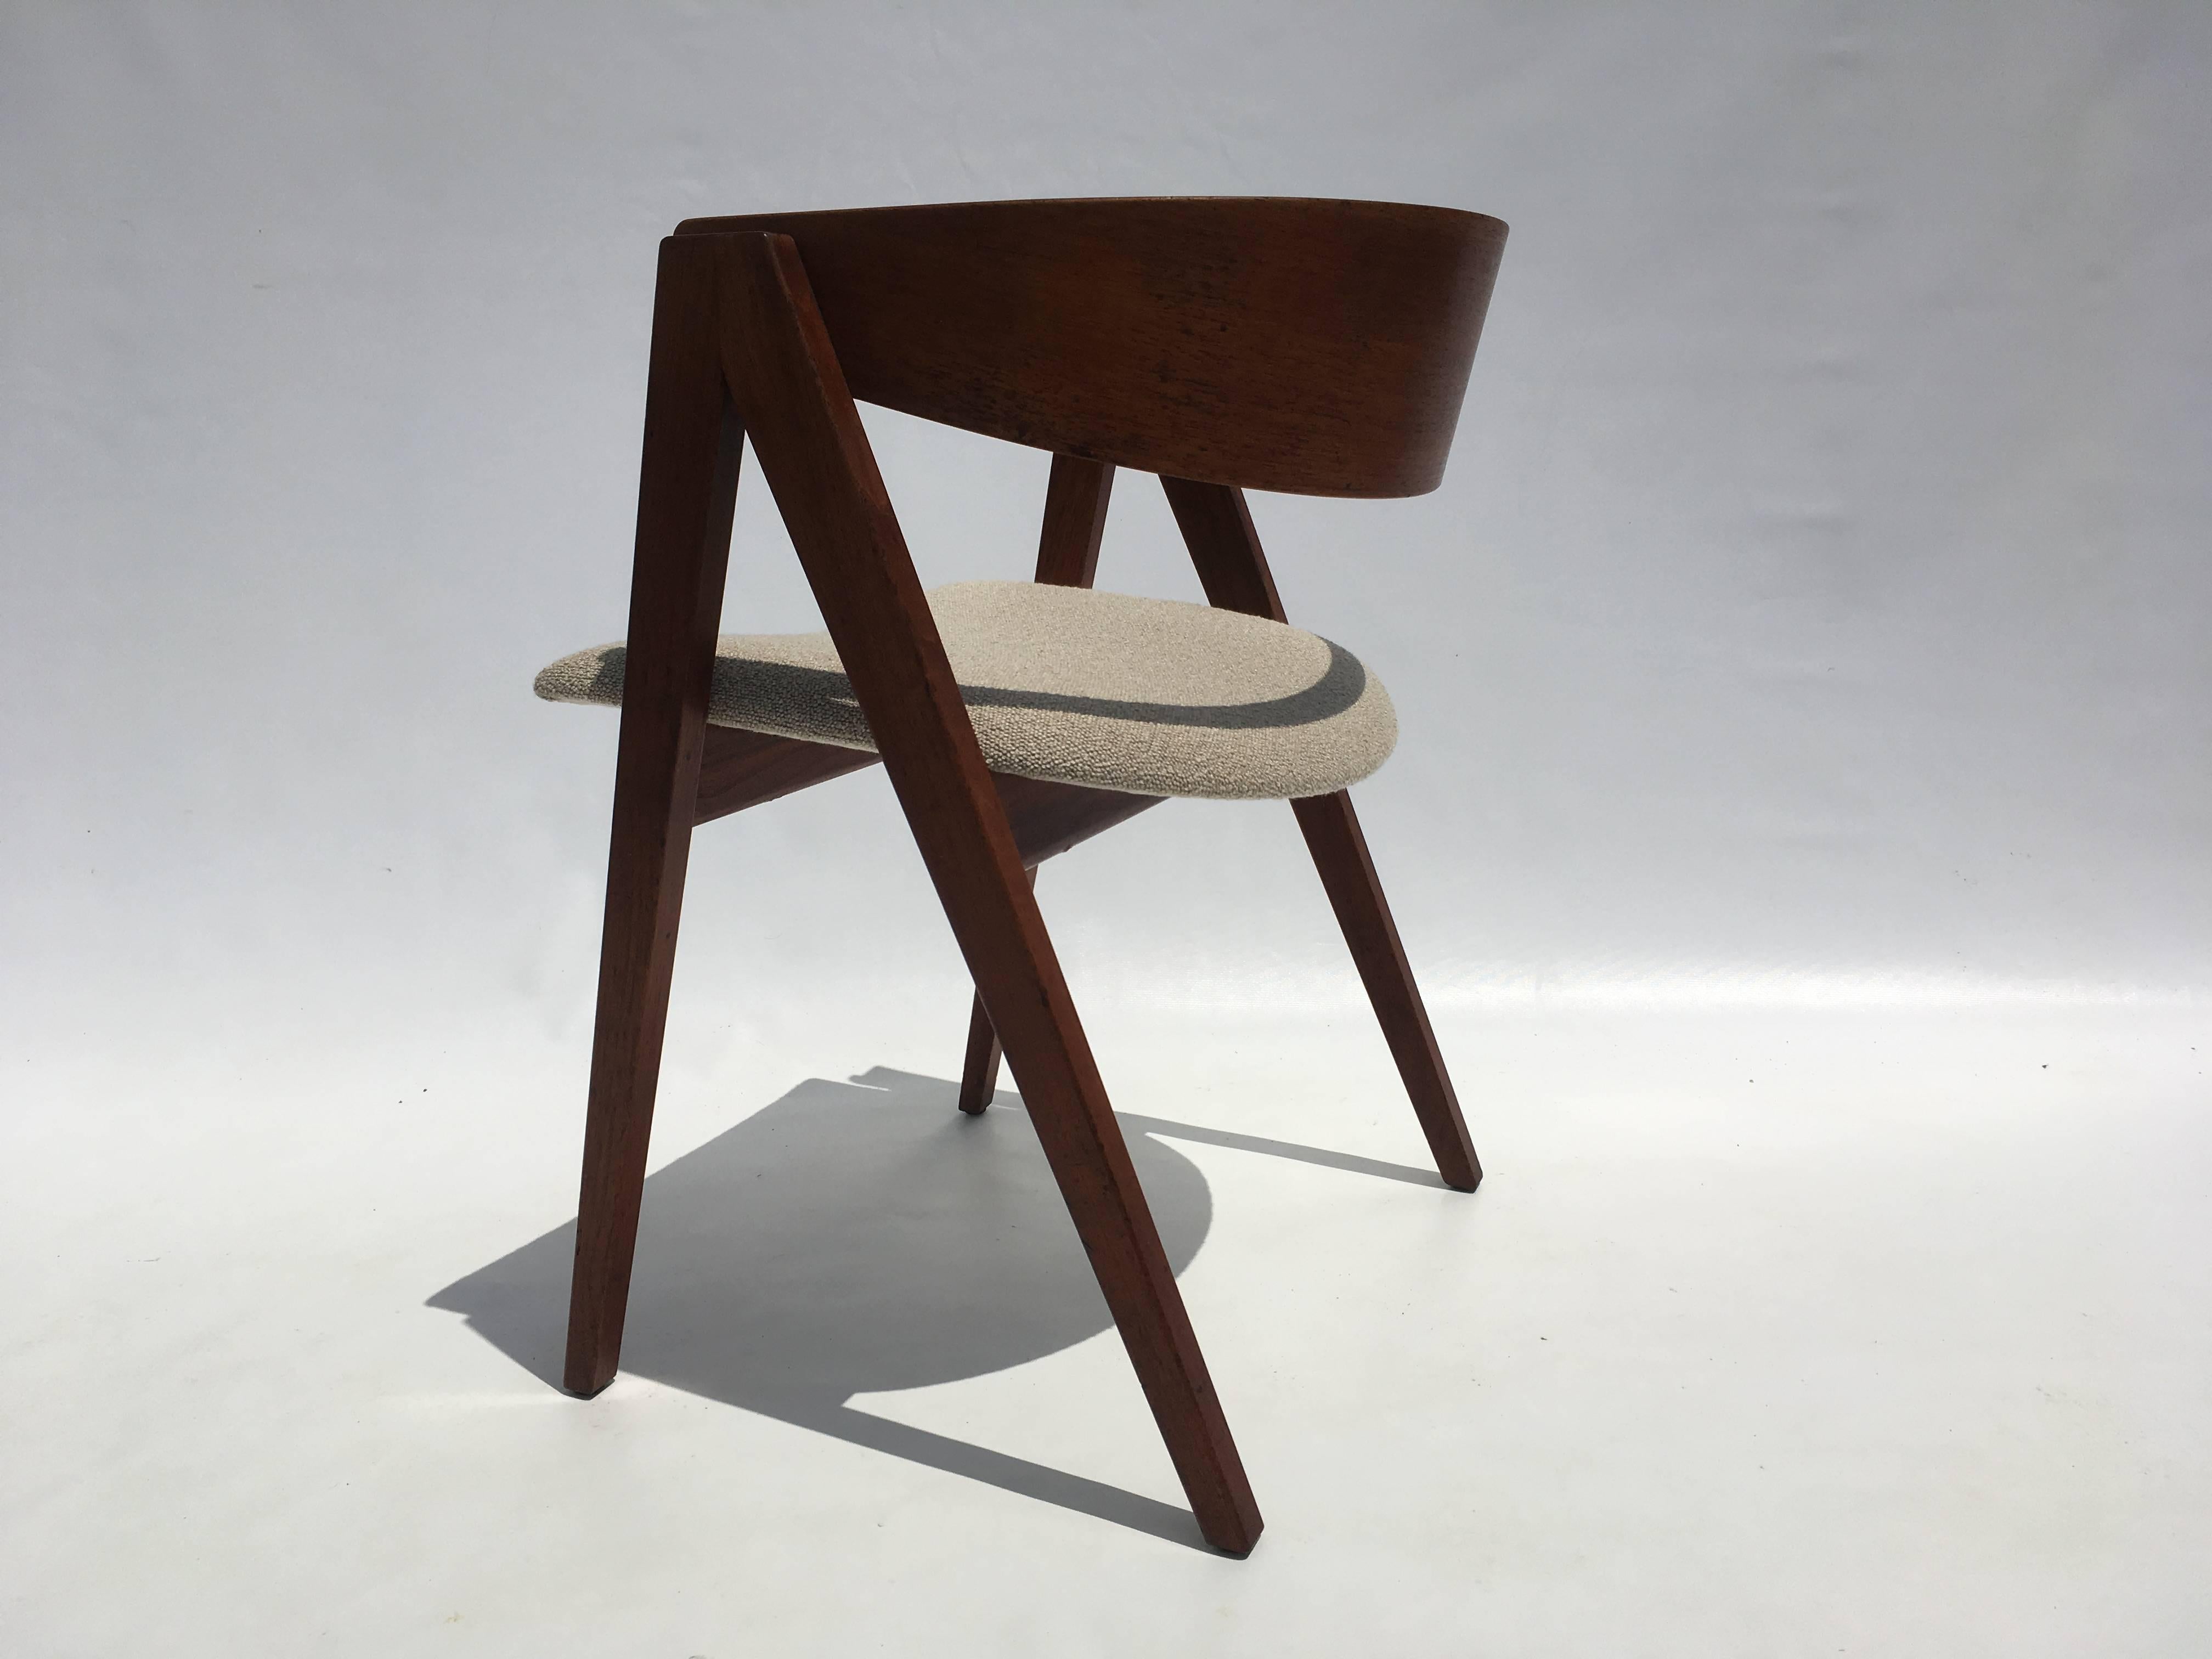 Great chair! Measure: Seat height is 17